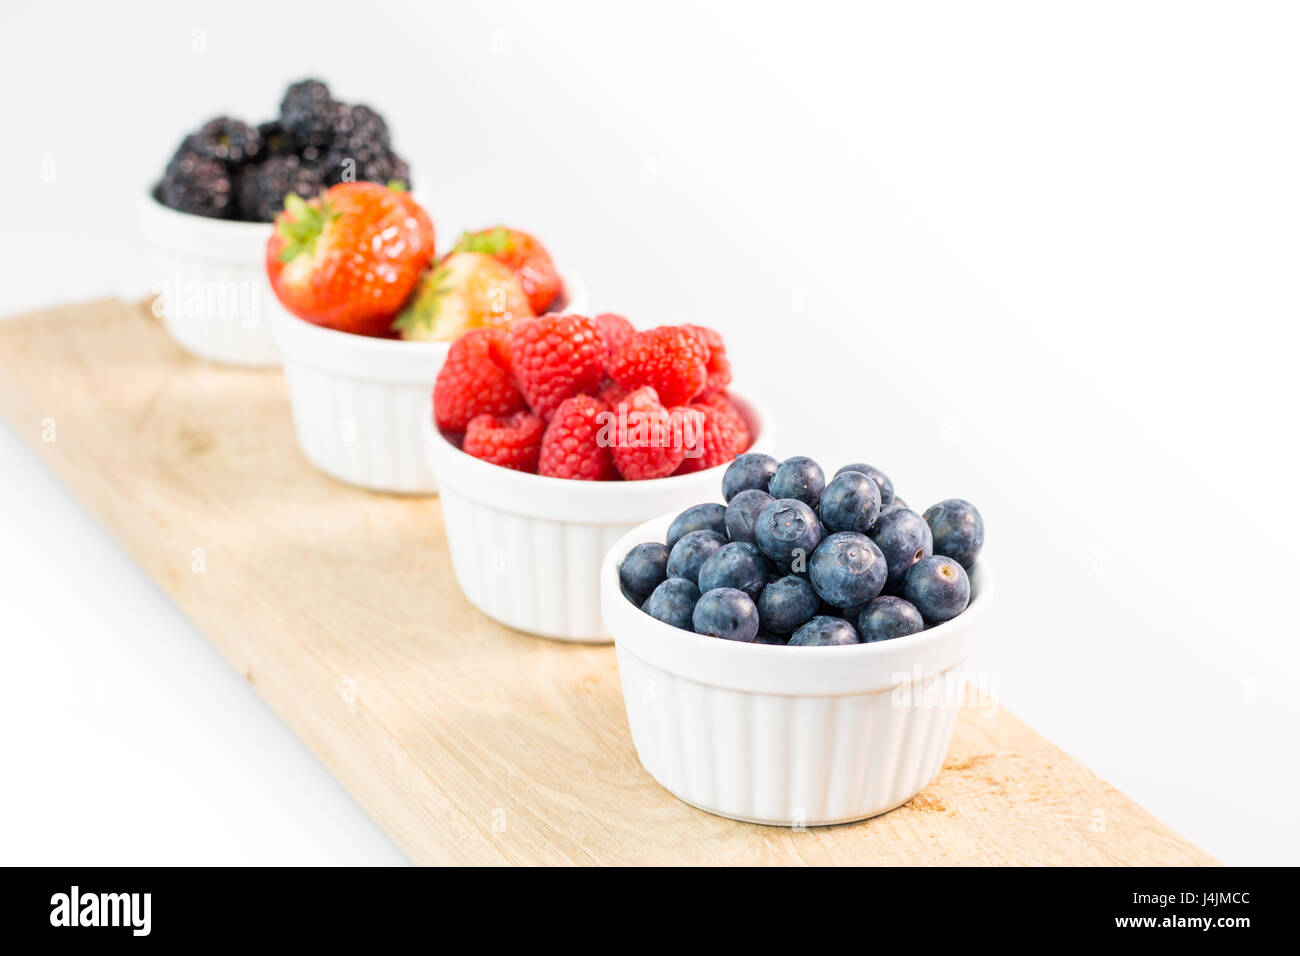 Blueberries, raspberries, strawberries and blackberries on wooden cutting board with shallow depth of field Stock Photo